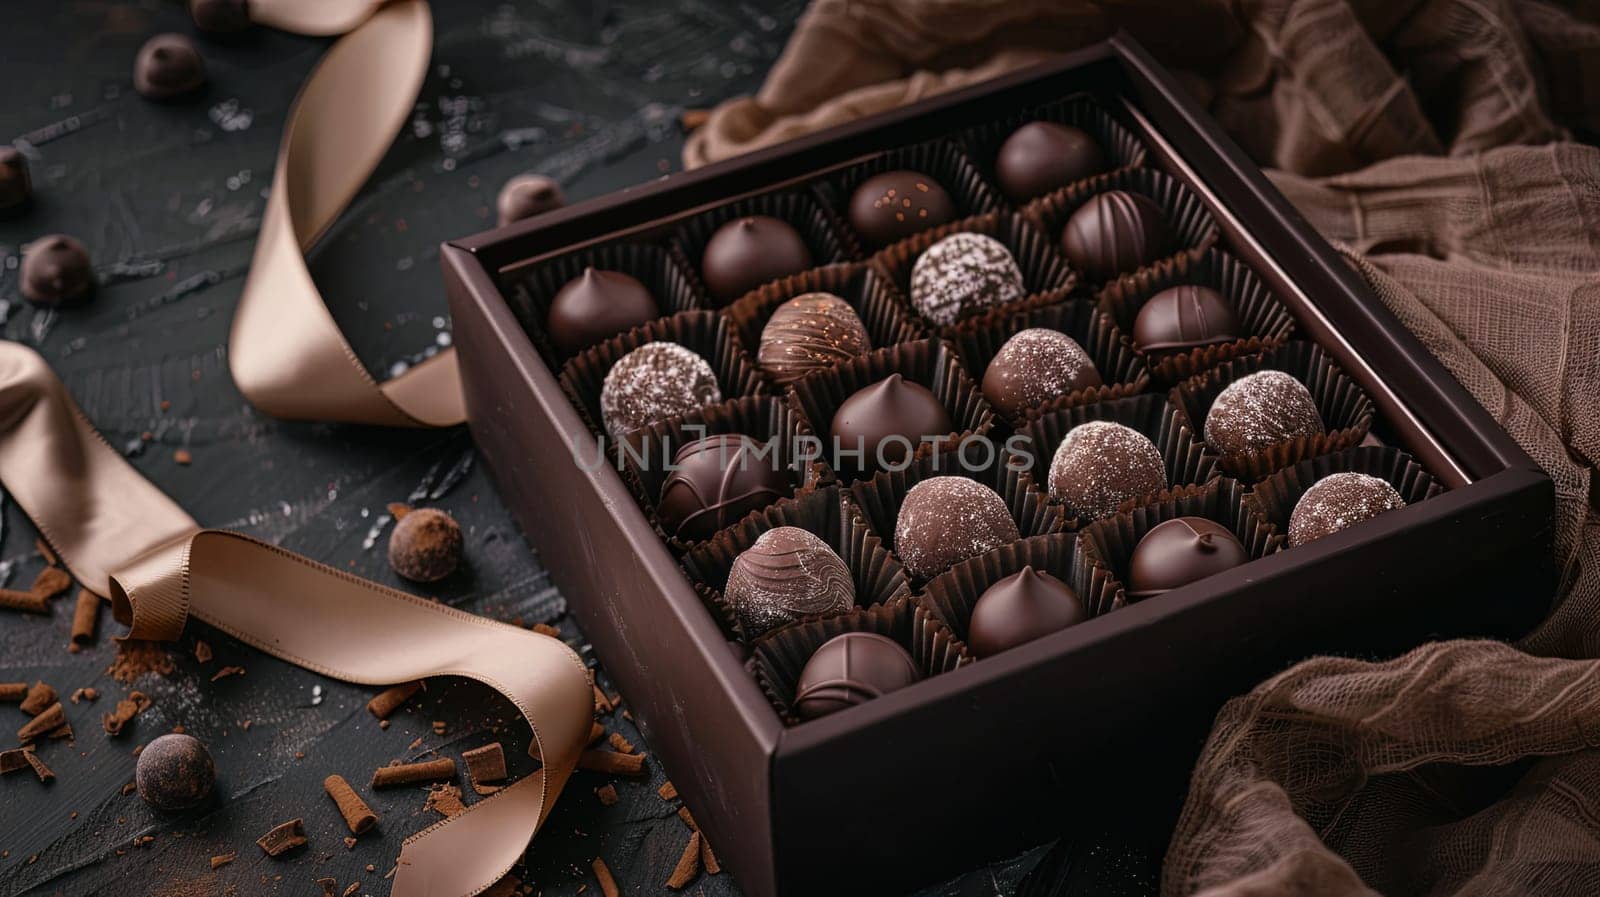 A luxurious box of chocolate truffles, decorated with ribbons, placed on top of a table.